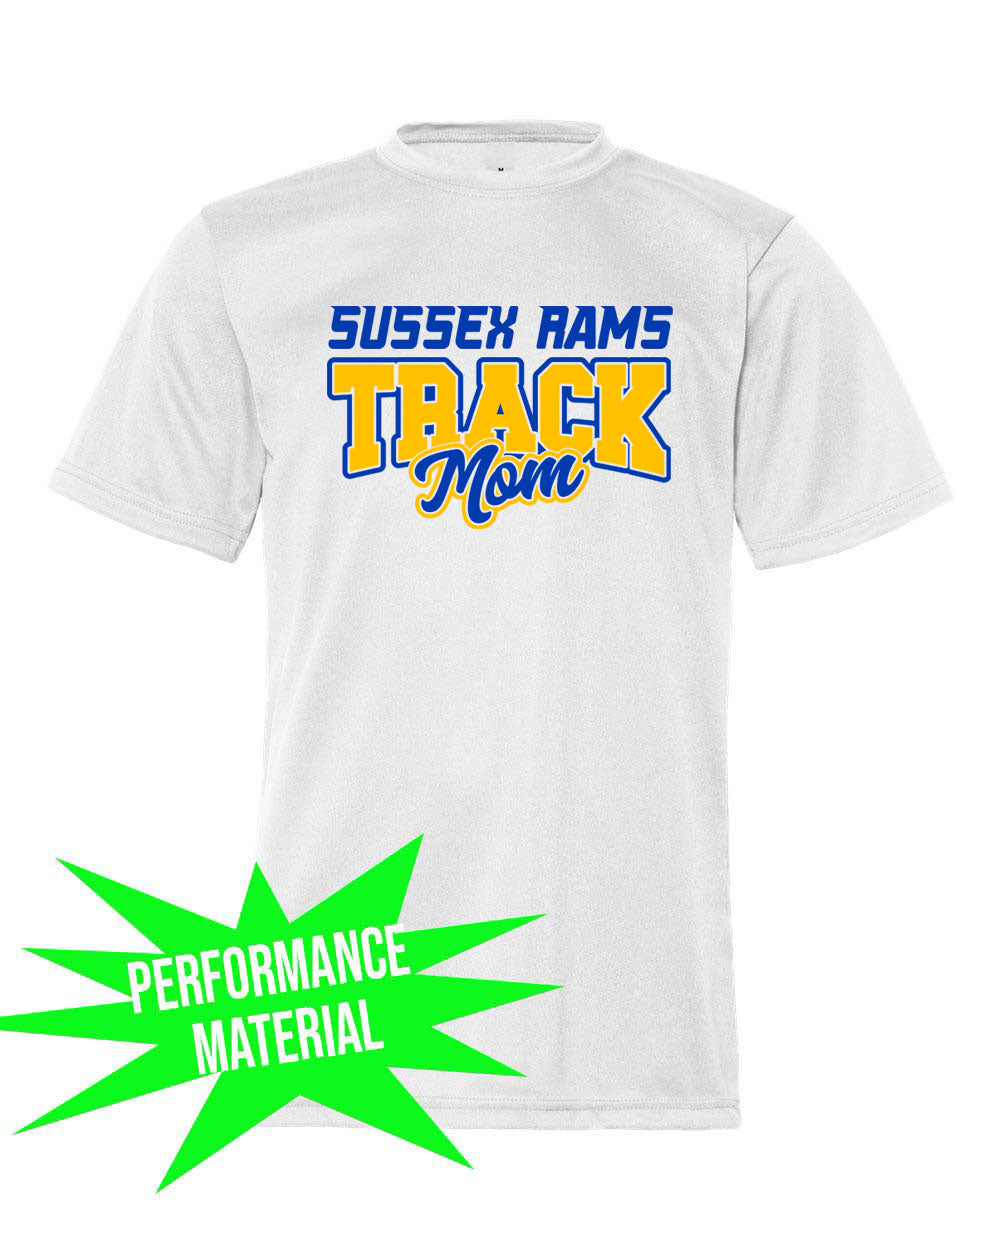 Sussex Rams Track Performance Material T-Shirt Design 1